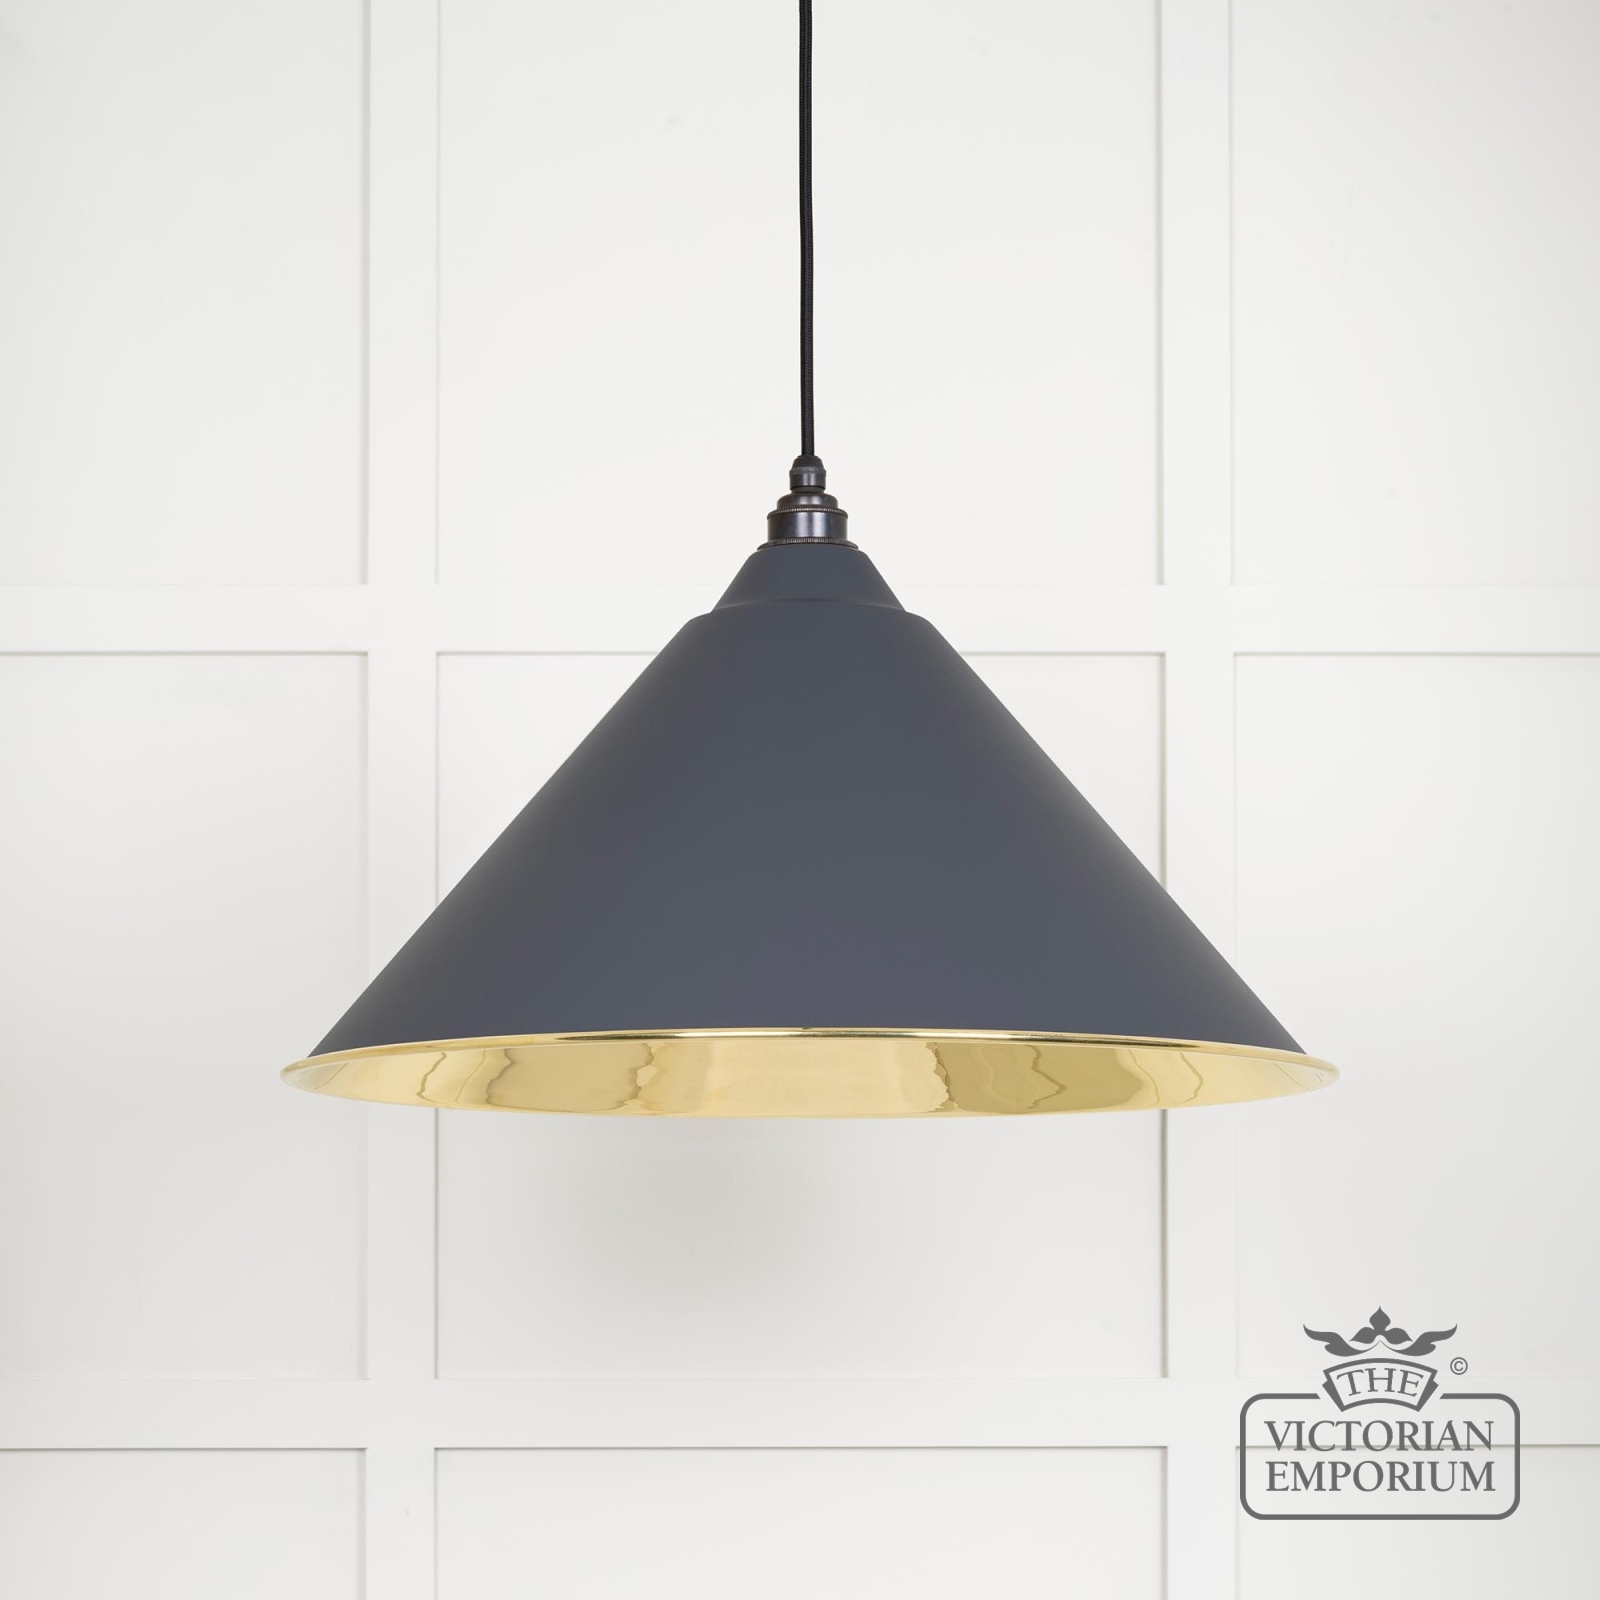 Hockliffe pendant light in Slate and Smooth Brass